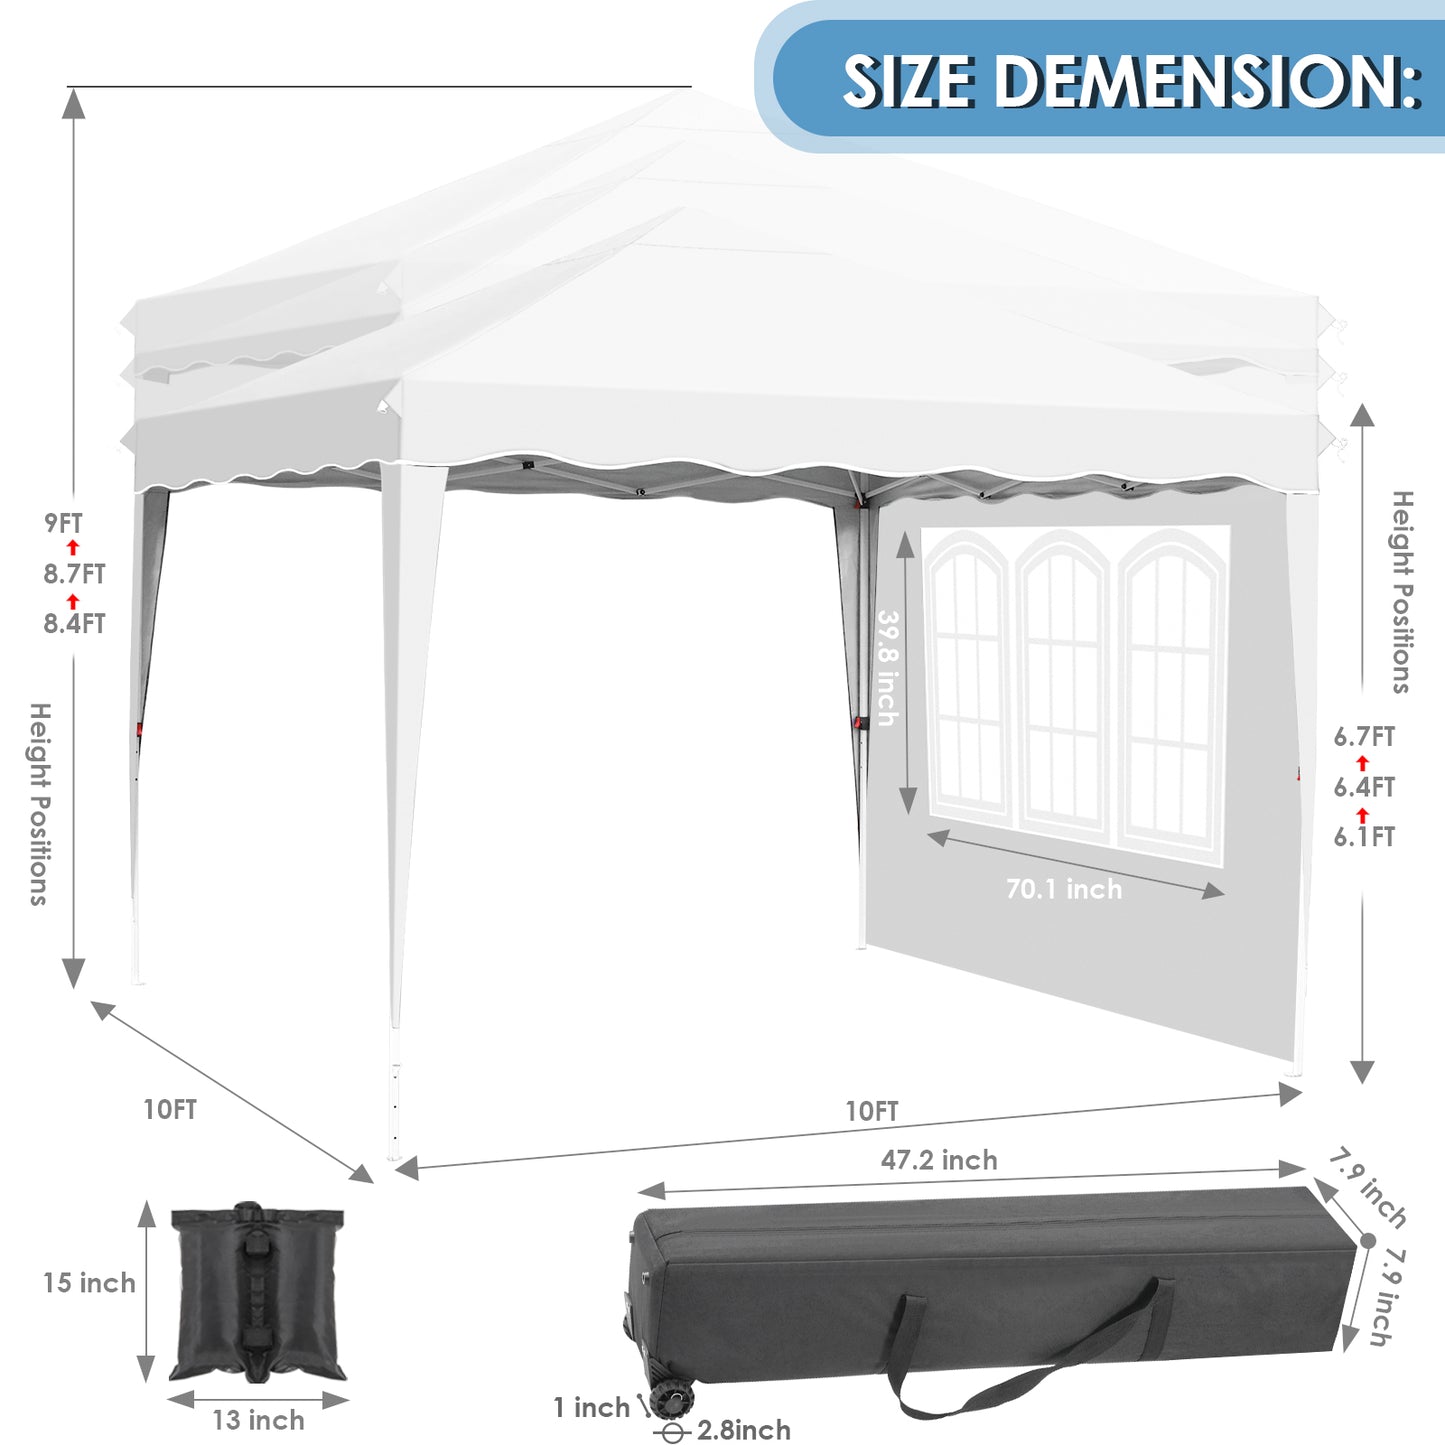 Arlopu 10x10 Pop Up Commercial Canopy Tent, Fully Waterproof Instant Gazebo Tent with 4 Removable Sidewall, Heavy Duty Outdoor Party Events Camping Beach Canopies, Upgraded Removable Wheel Bag, White